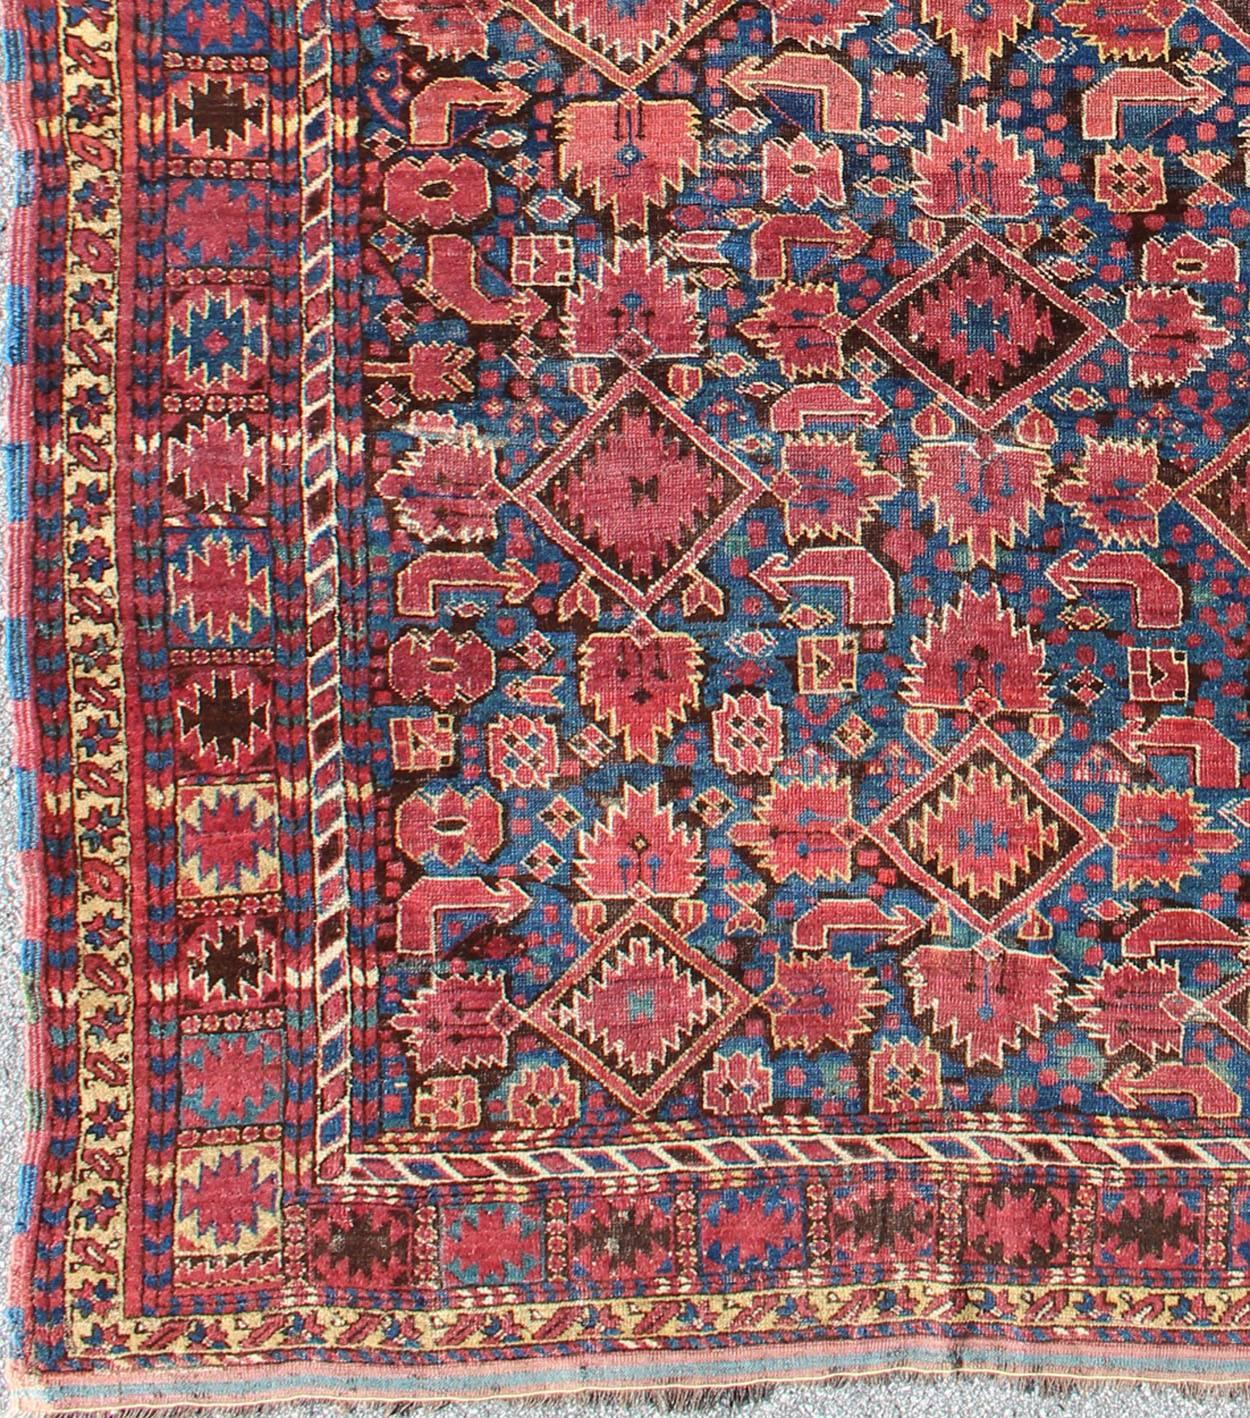  Antique Beshir/Bashir Rug from Mid 19th Century in Blue, Red, Brown, Turkmenistan rug 16-1106. 
Bashir rugs primarily were woven by Ersai Tribes. Ersari Tribe rugs were woven from Uzbekistan to Turkmenistan and into northern Afghanistan. Beshir